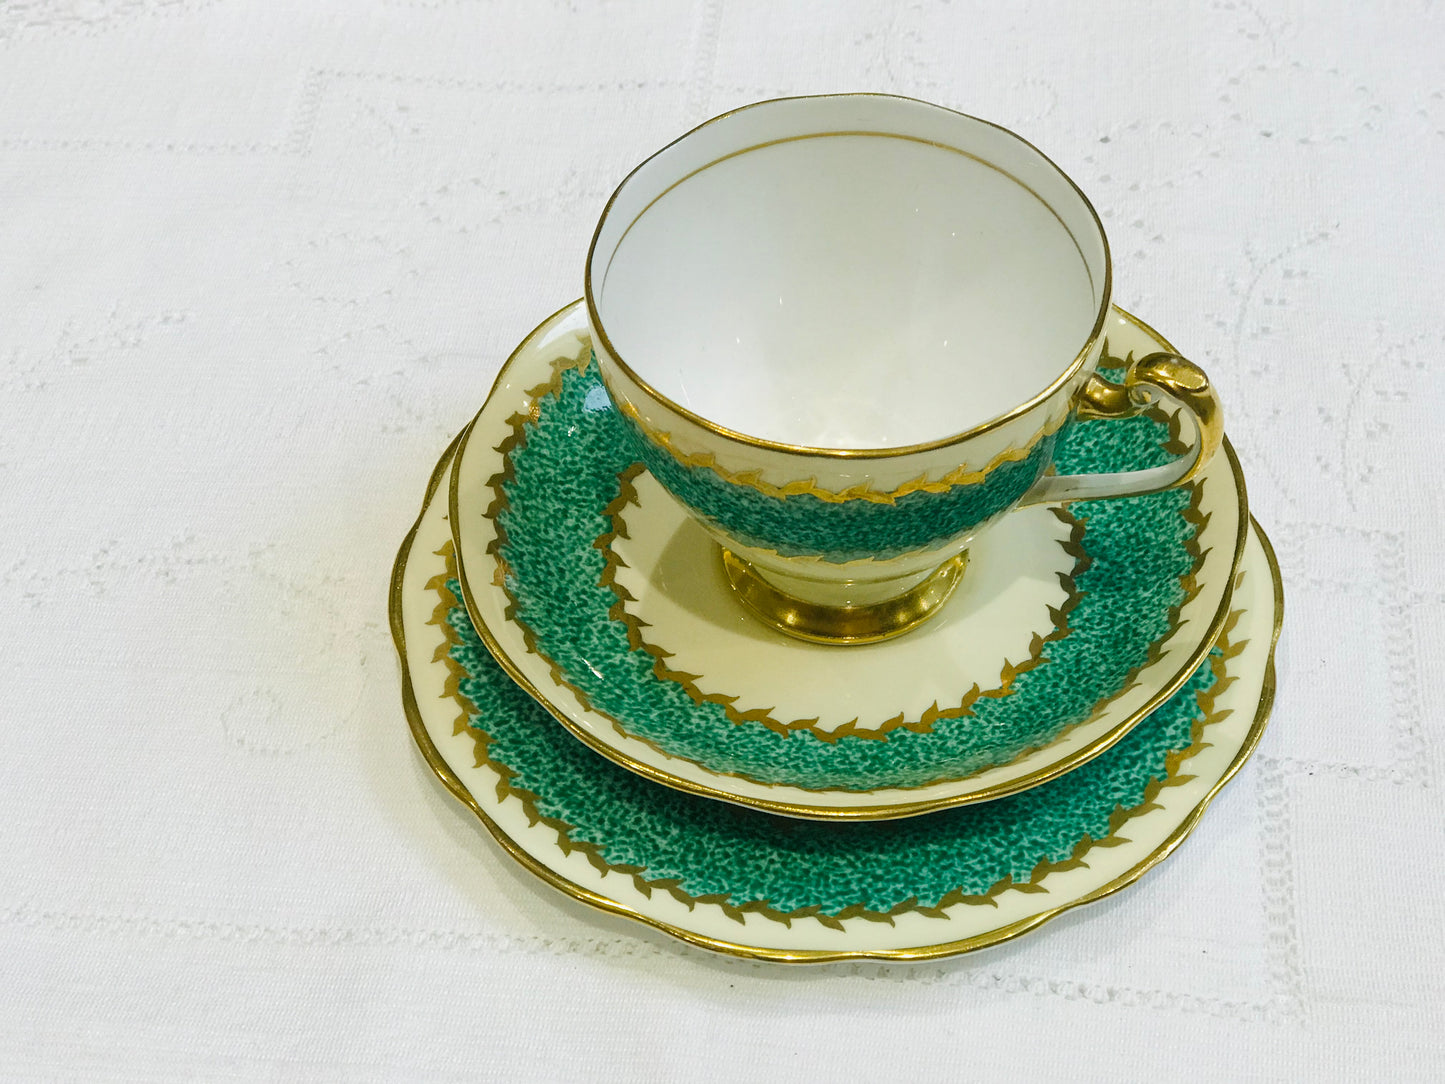 Emerald Green Teacup Set by Roslyn China